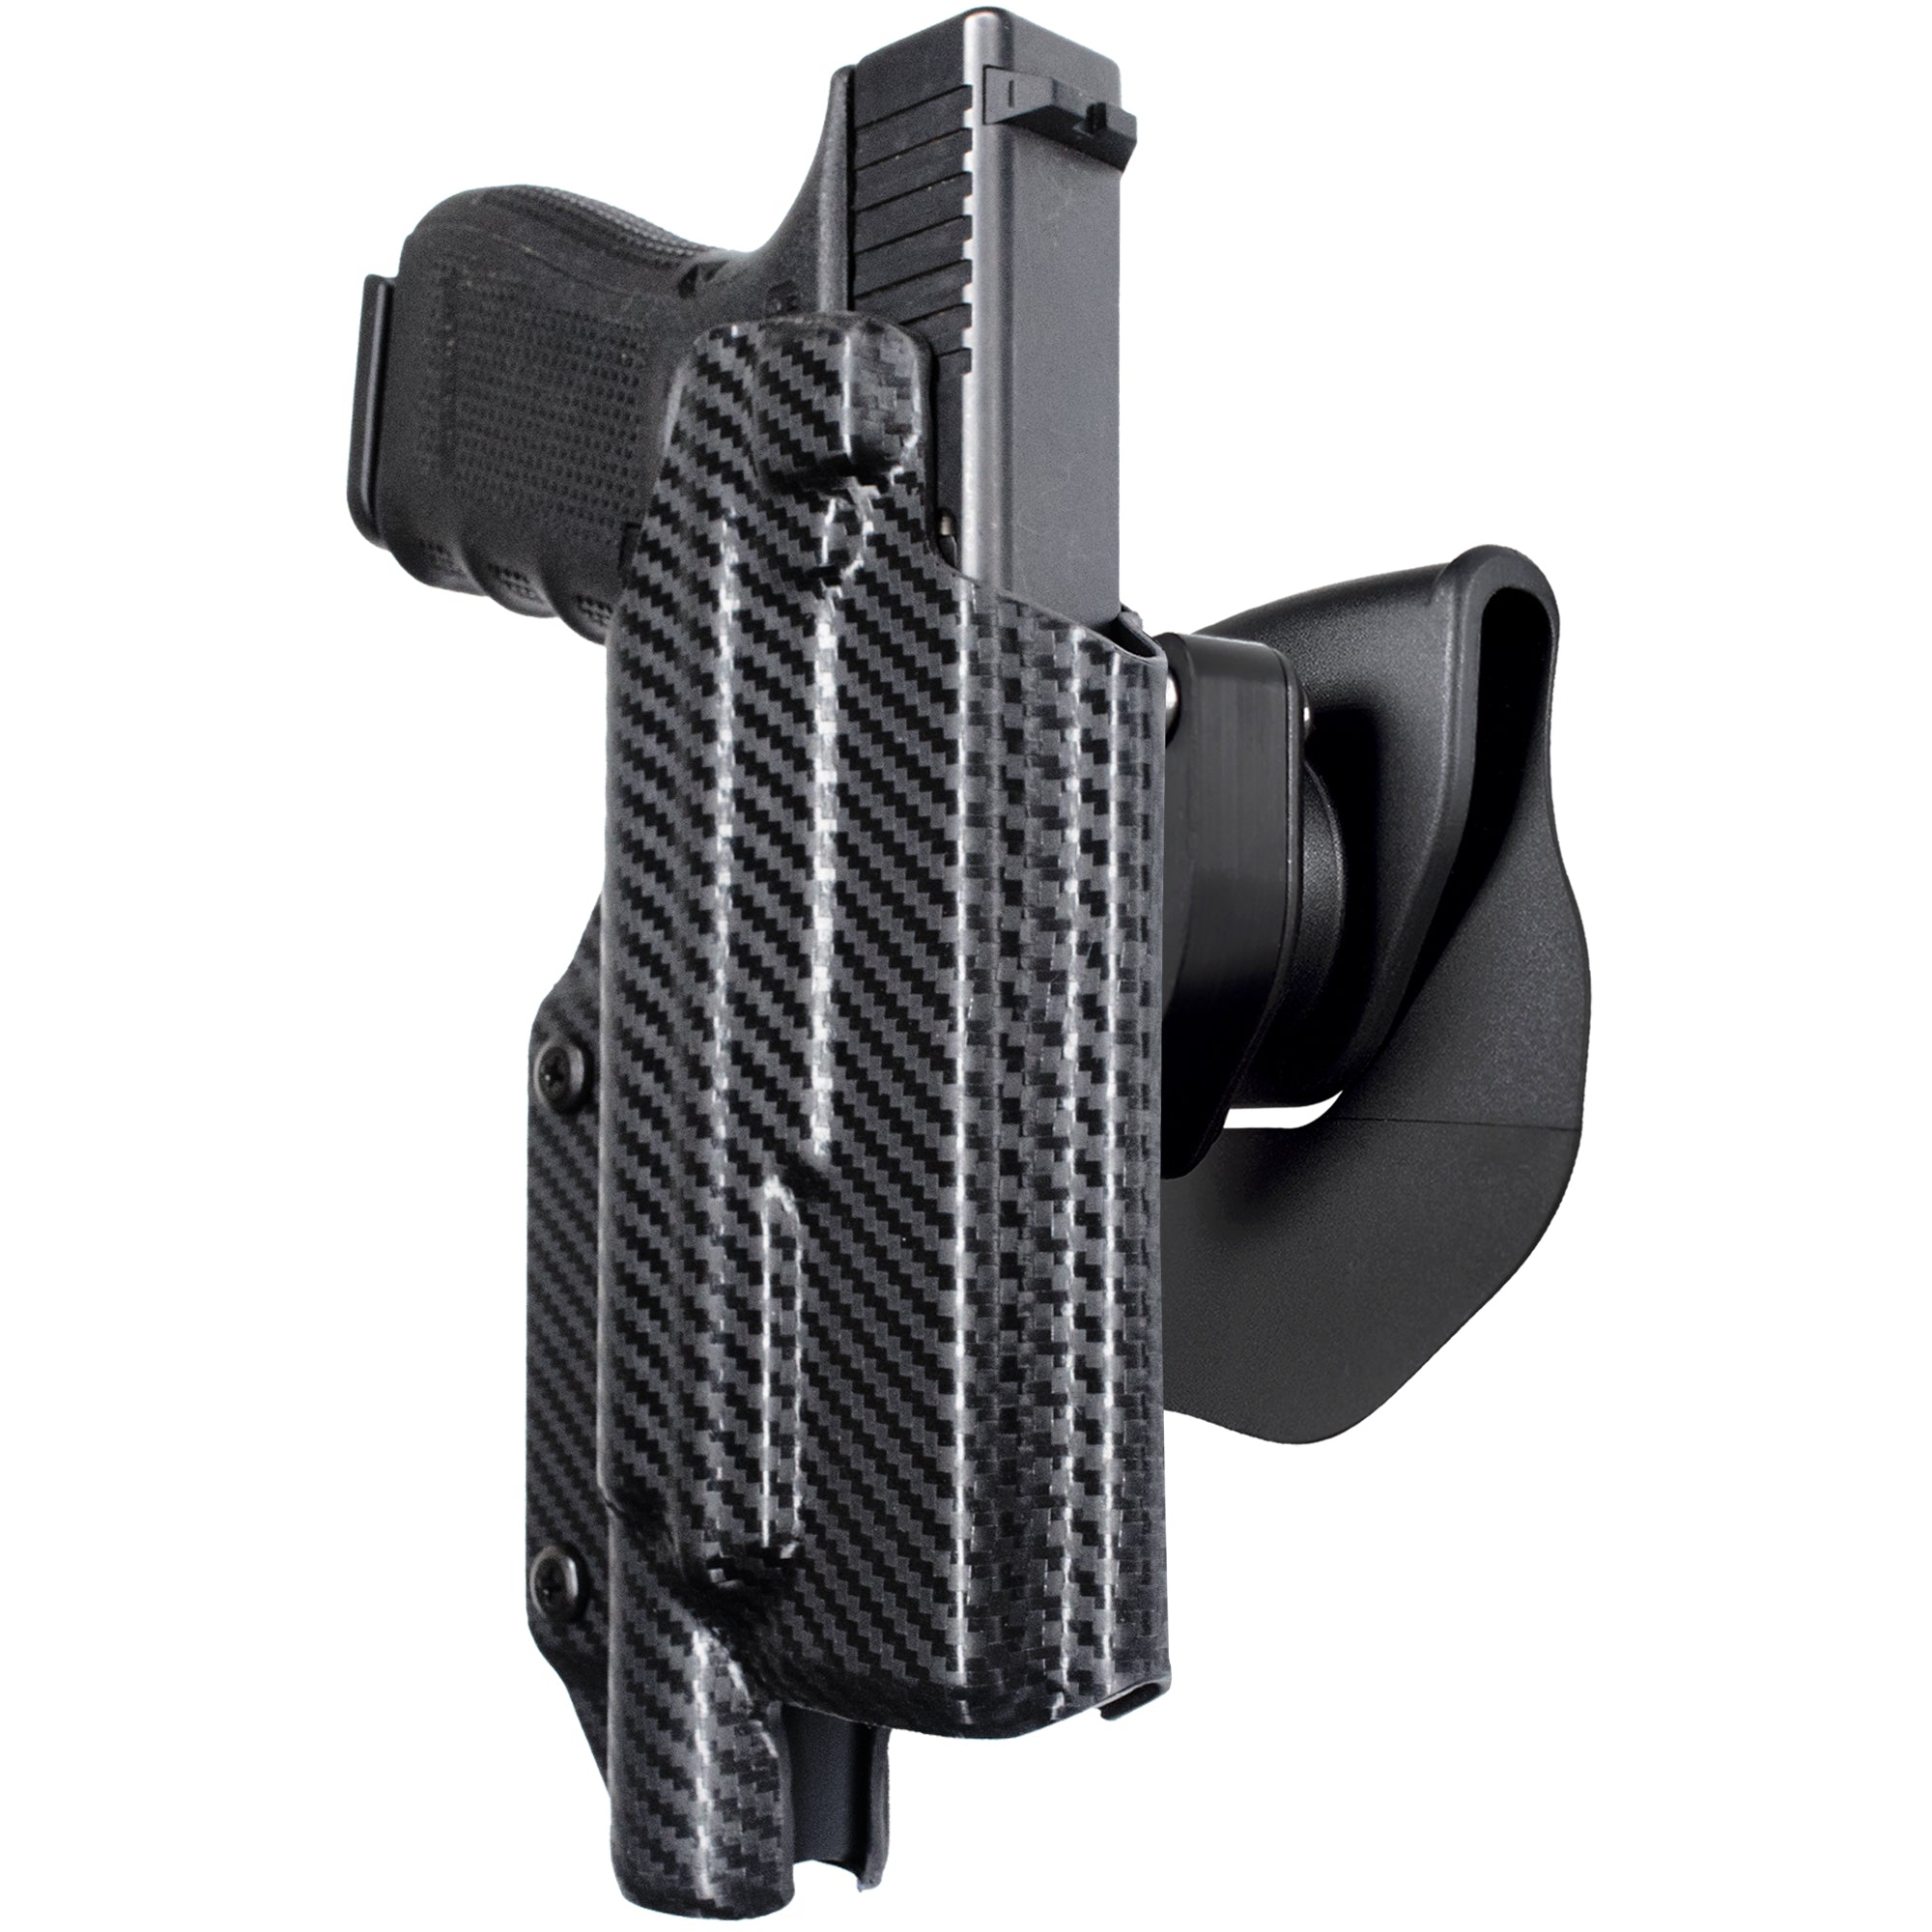 OWB Quick Release Paddle Holster in Carbon Fiber